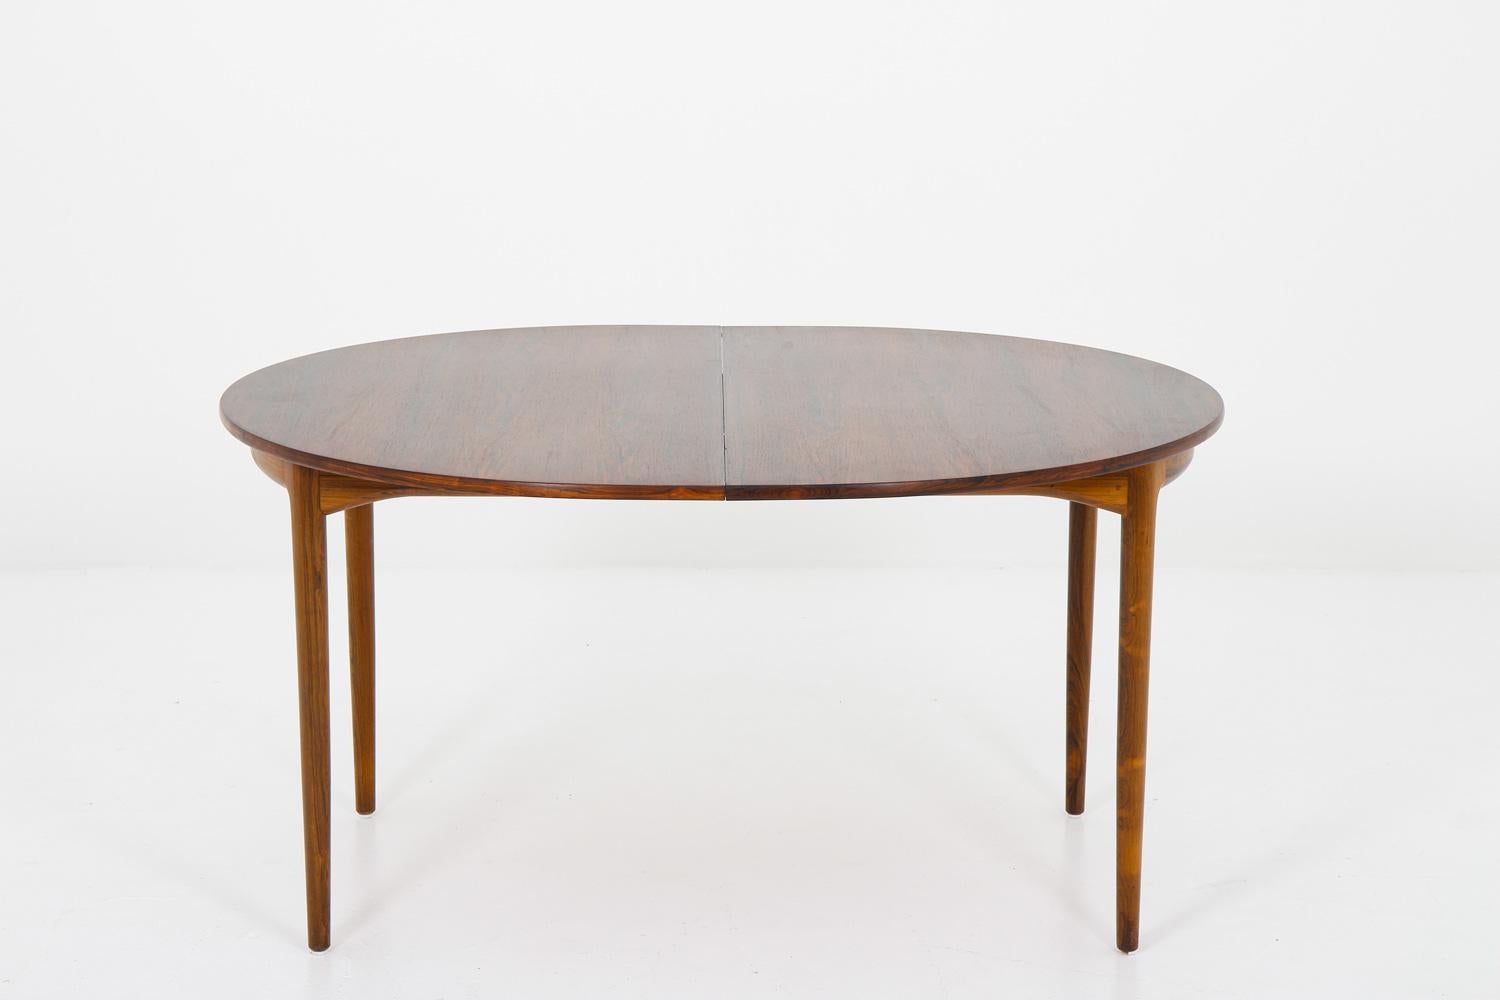 Rare dining table by Ib Kofod Larsen for Seffle Möbelfabrik, 1960s.
This large oval-shaped dining table is made with an impressive sense for quality and shows beatiful details. The table comes with two extending leaves that measure 45cm (17,7